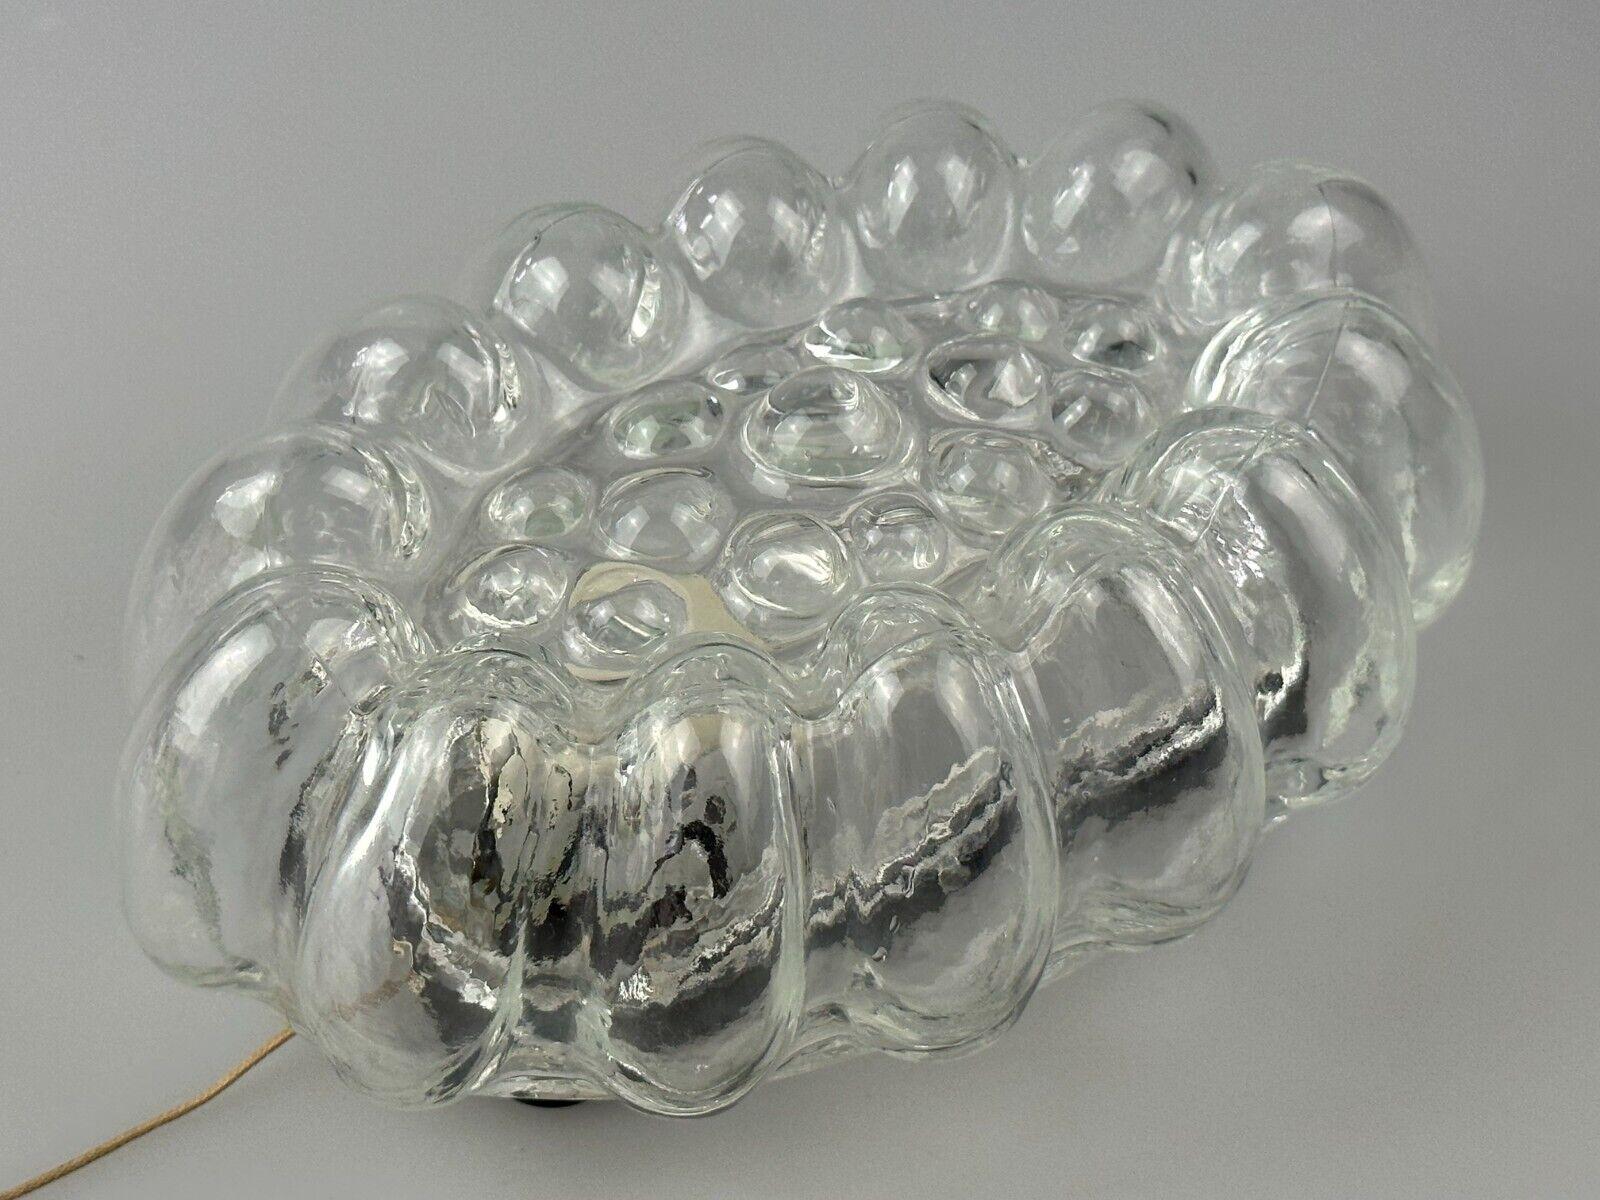 60s 70s wall lamp made of glass & metal bubble wall sconce space age design For Sale 1